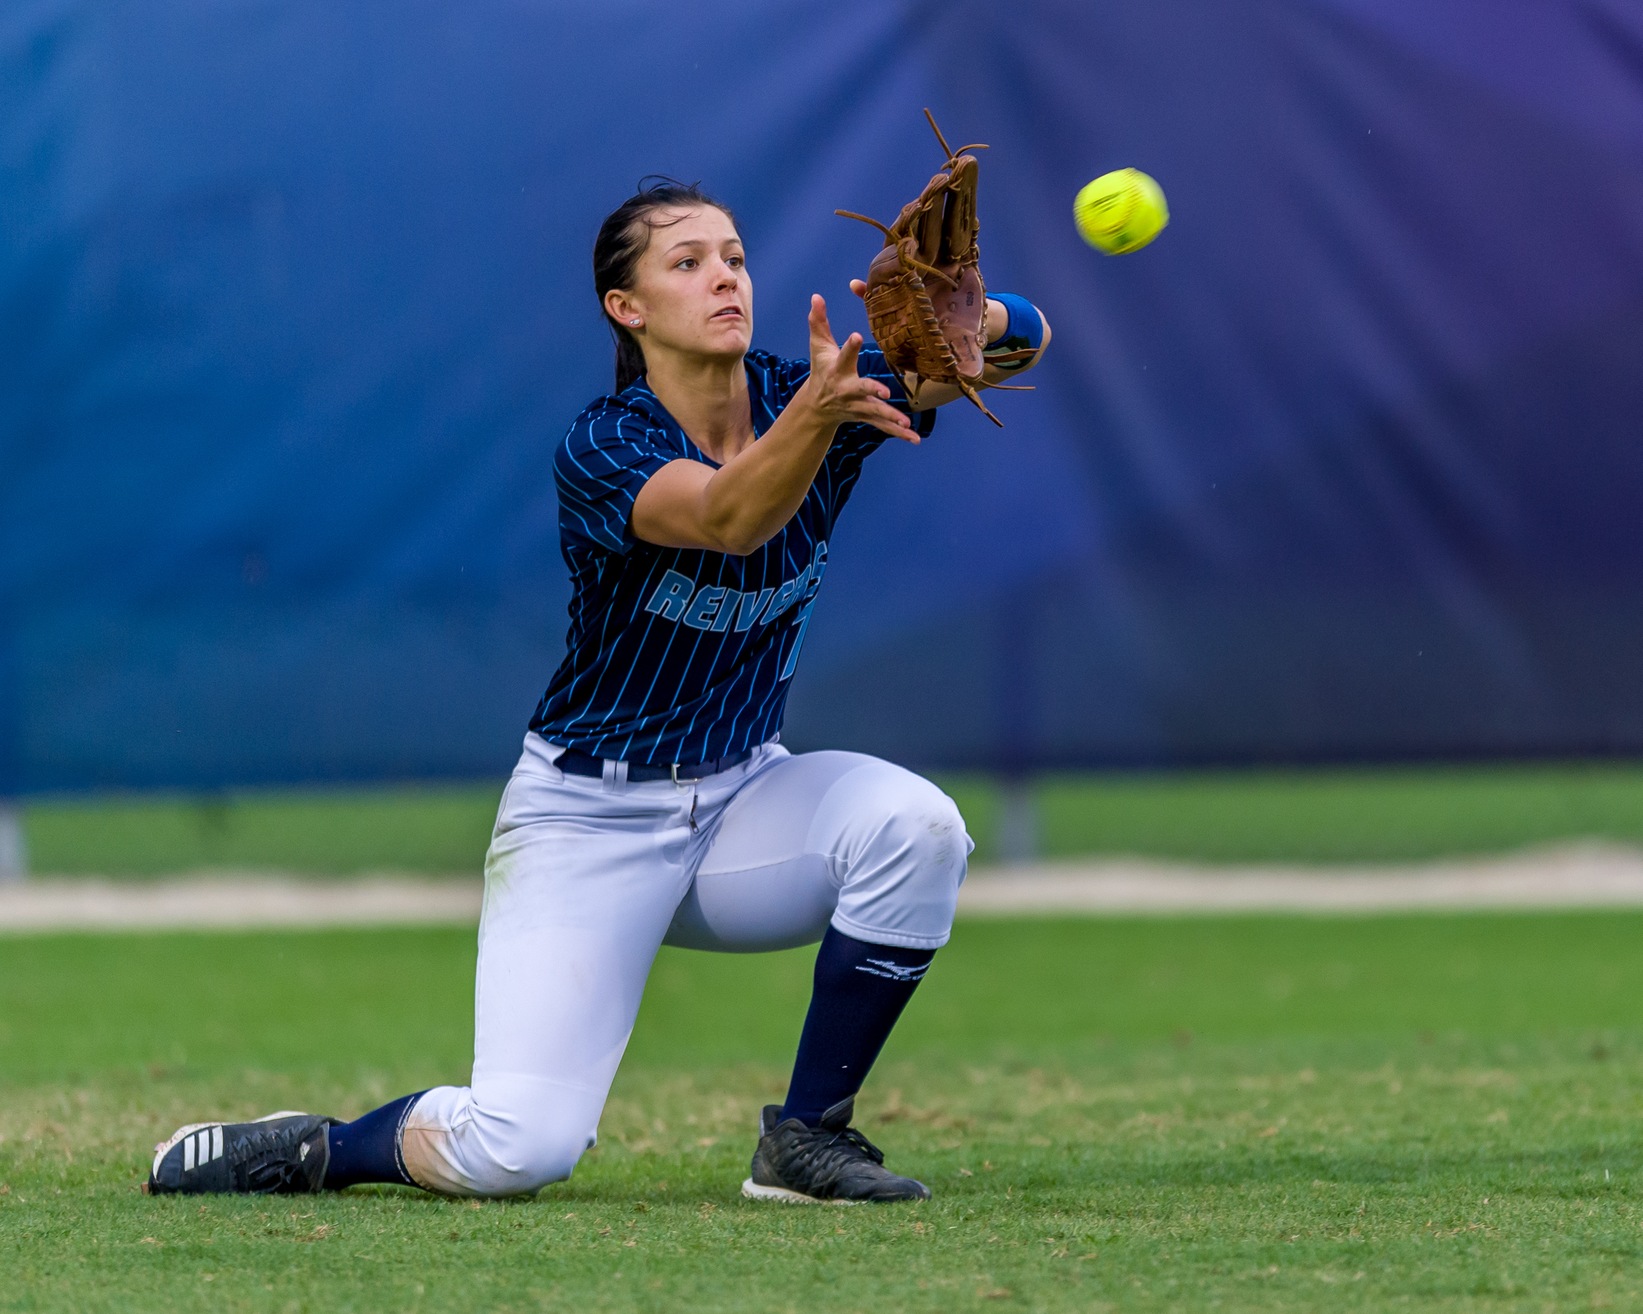 Sophomore Centerfielder Lily Gregory prepares to record an out.

PHOTO COURTESY OF CAPTIVE PHOTONS captivephotons.com